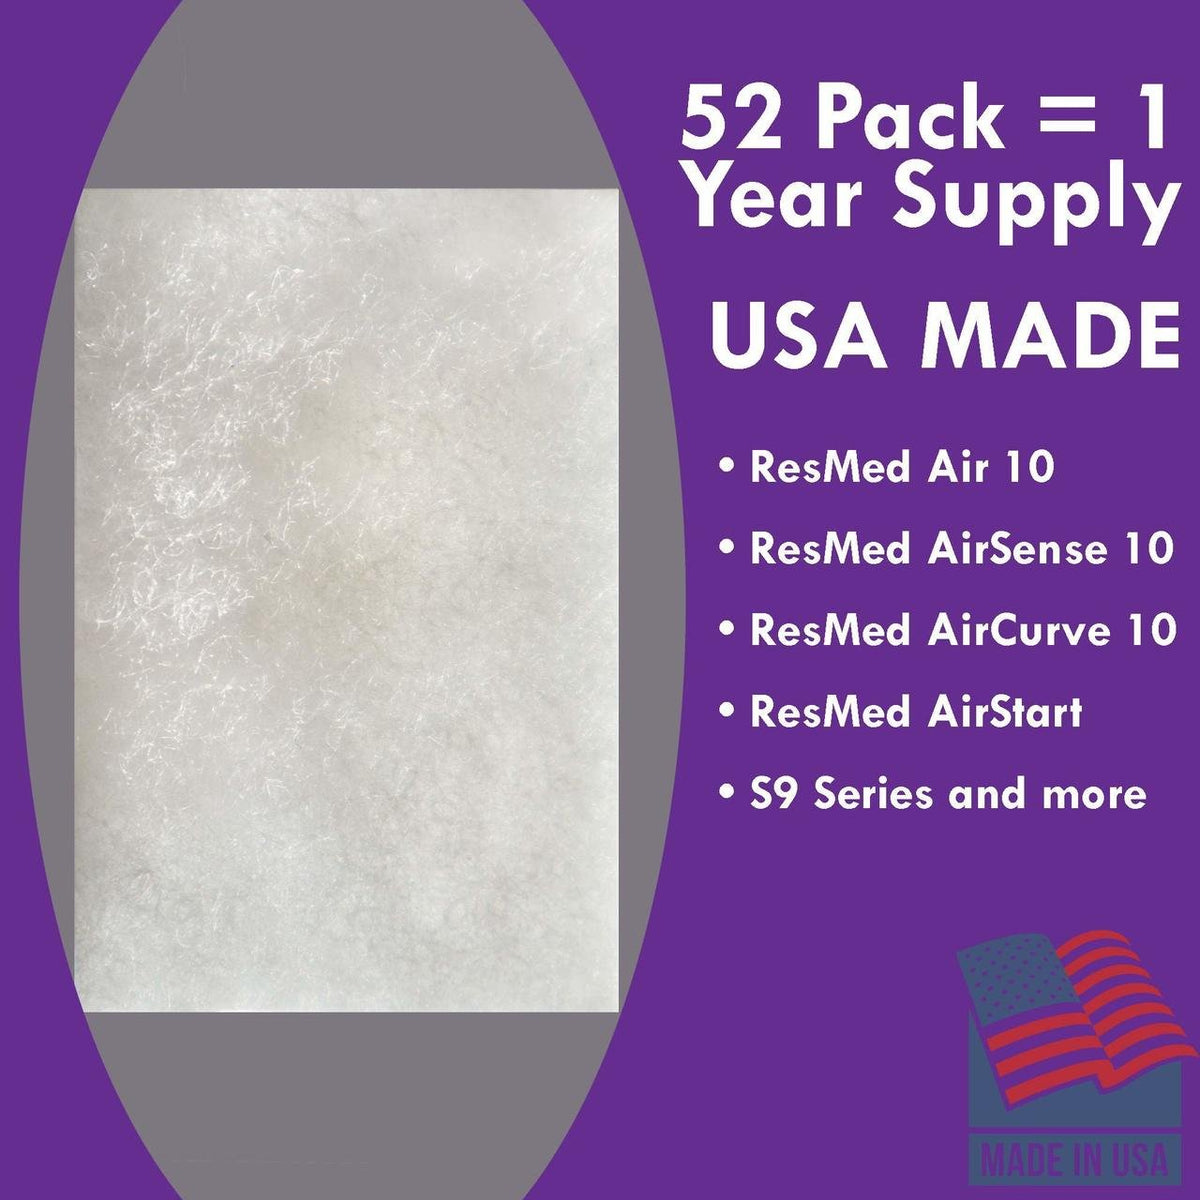 CPAP Filters Disposable Felt Pollen air Filter - 52 Pack 1 Year Supply - Made in The USA Standard Universal CPAP Filter Supplies - ResMed Airsense 10, Aircurve 10, S9 Series Machines by Mars Wellness - Mars Med Supply